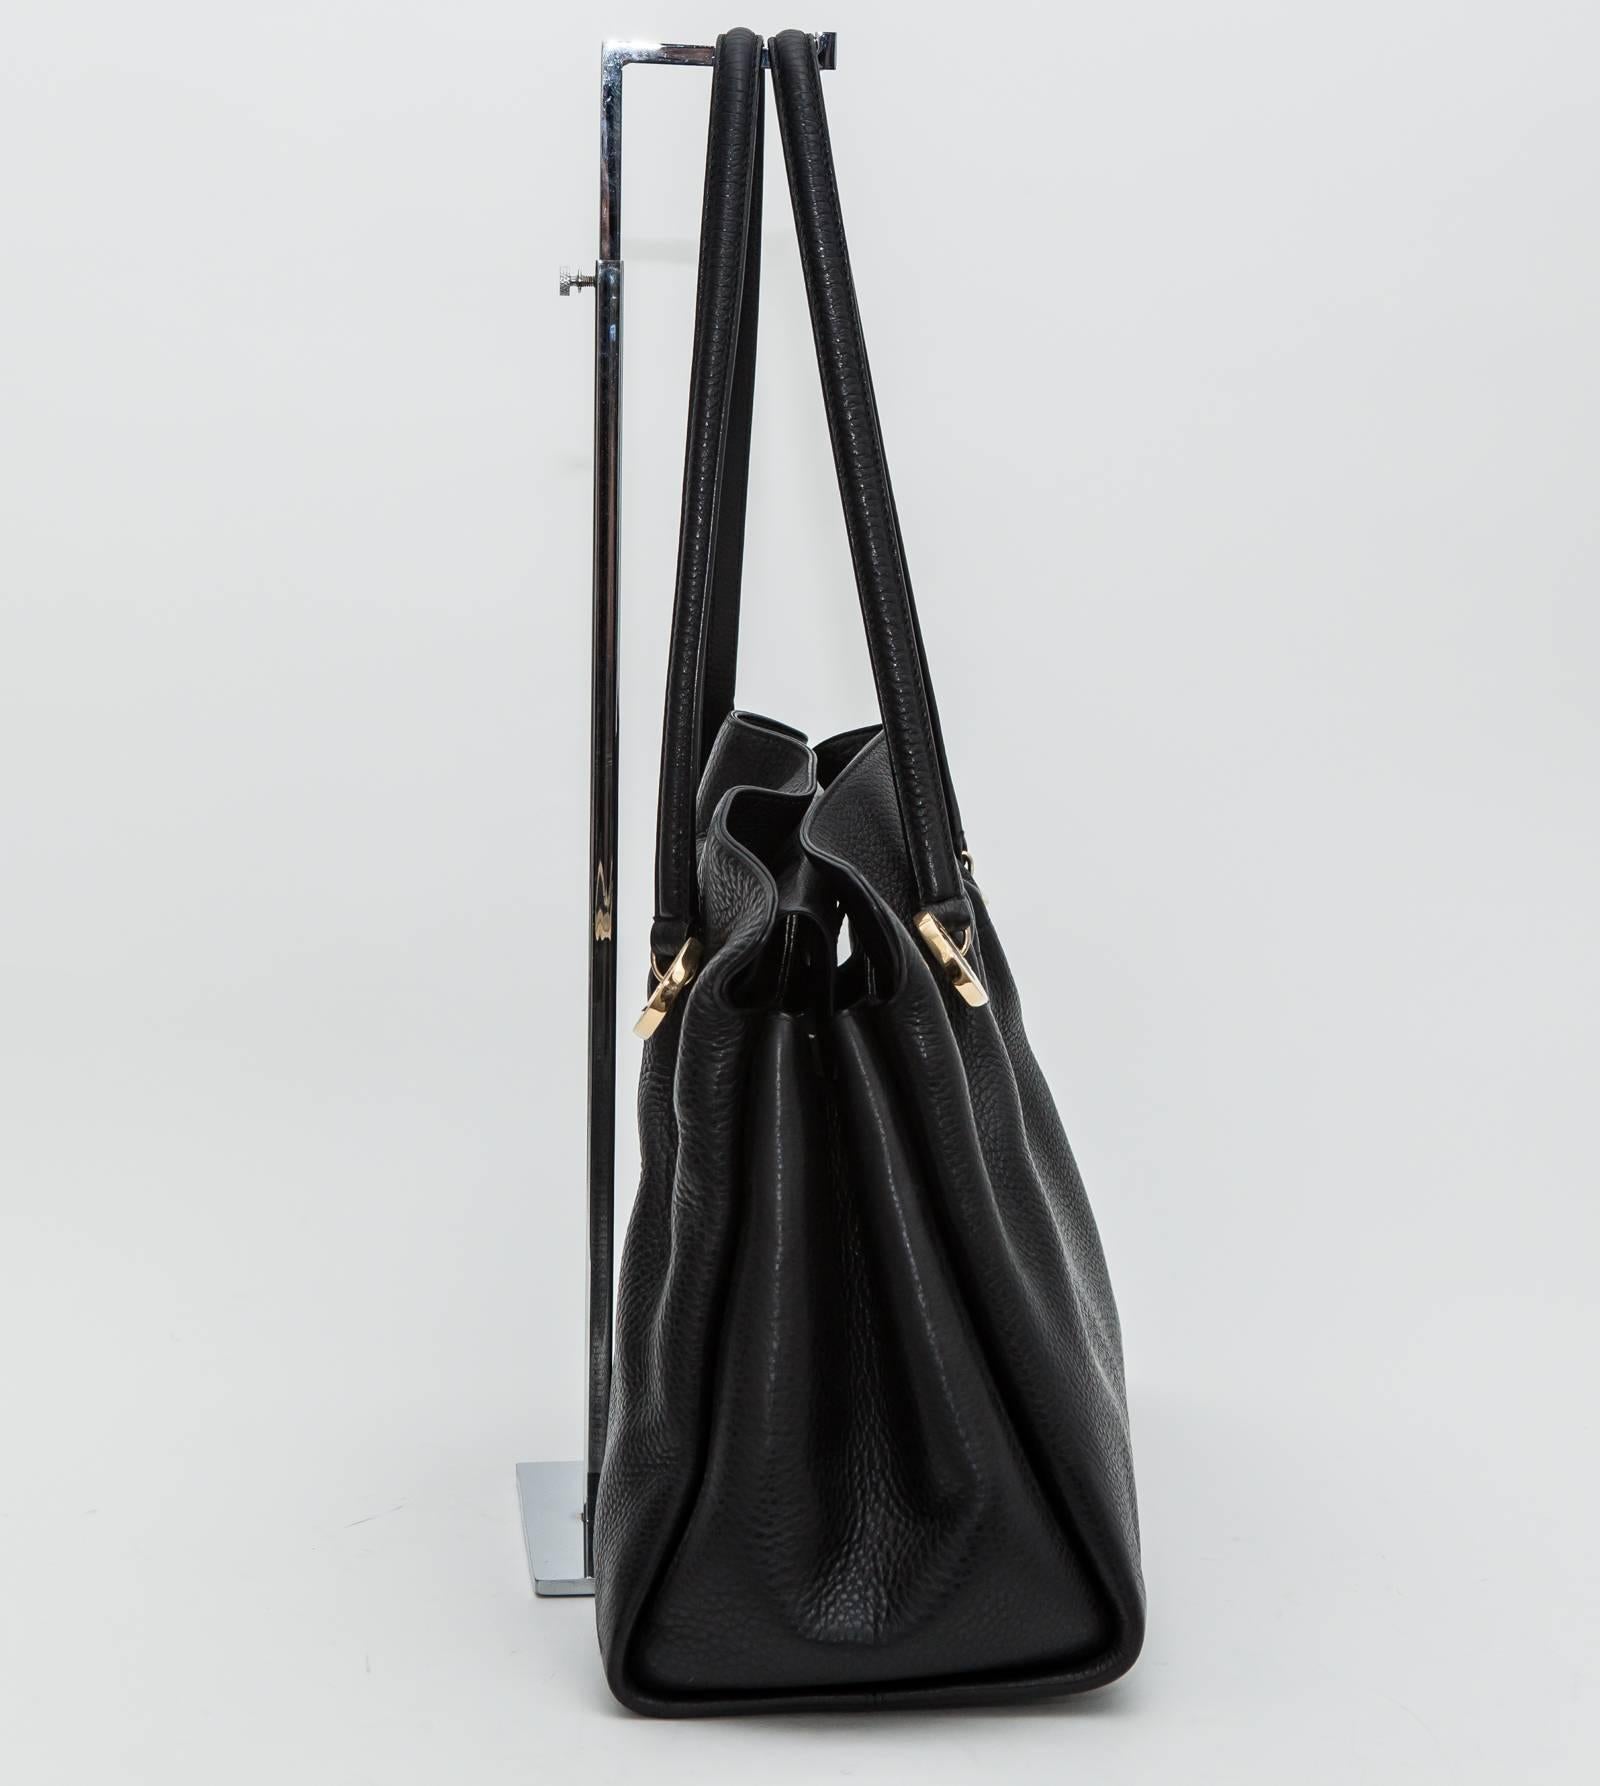 Black leather top handle shoulder bag with Bulagri gold hardware. Triple inside sections with inner pockets.